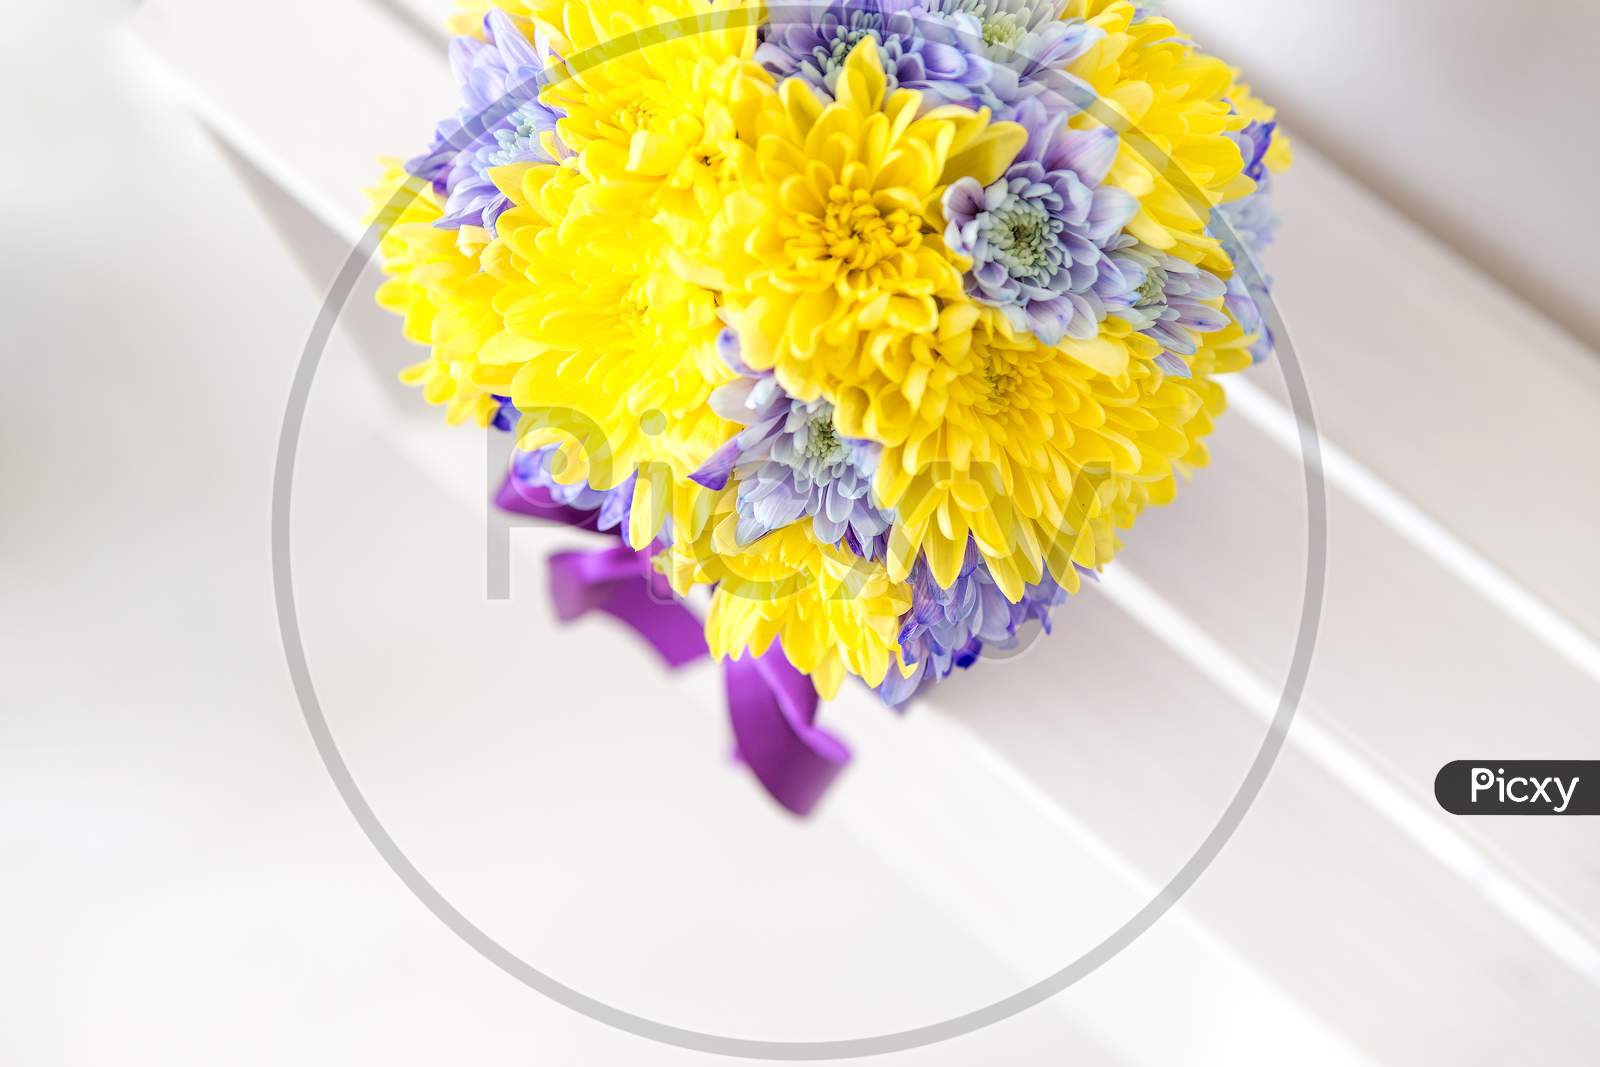 Top View Of A Decoration Of Chrysanthemum Flowers. The Flowers Are Yellow And Purple And Are In The Handmade Box With The Bow Also Purple. Behind Is A White Background.